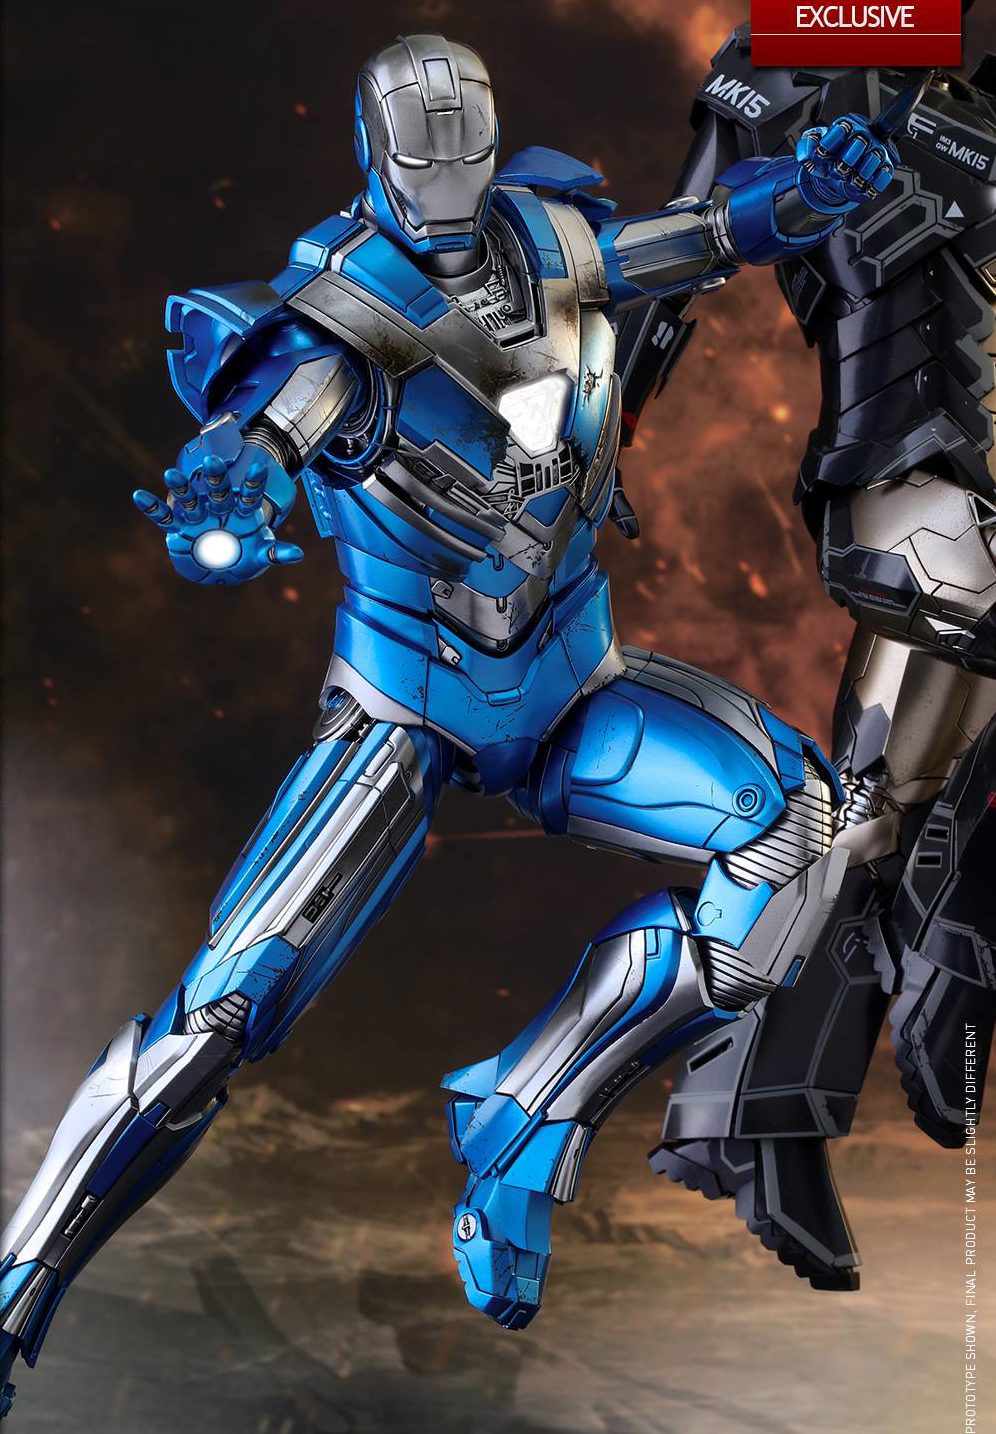 Exclusive Hot Toys Blue Steel Iron Man 